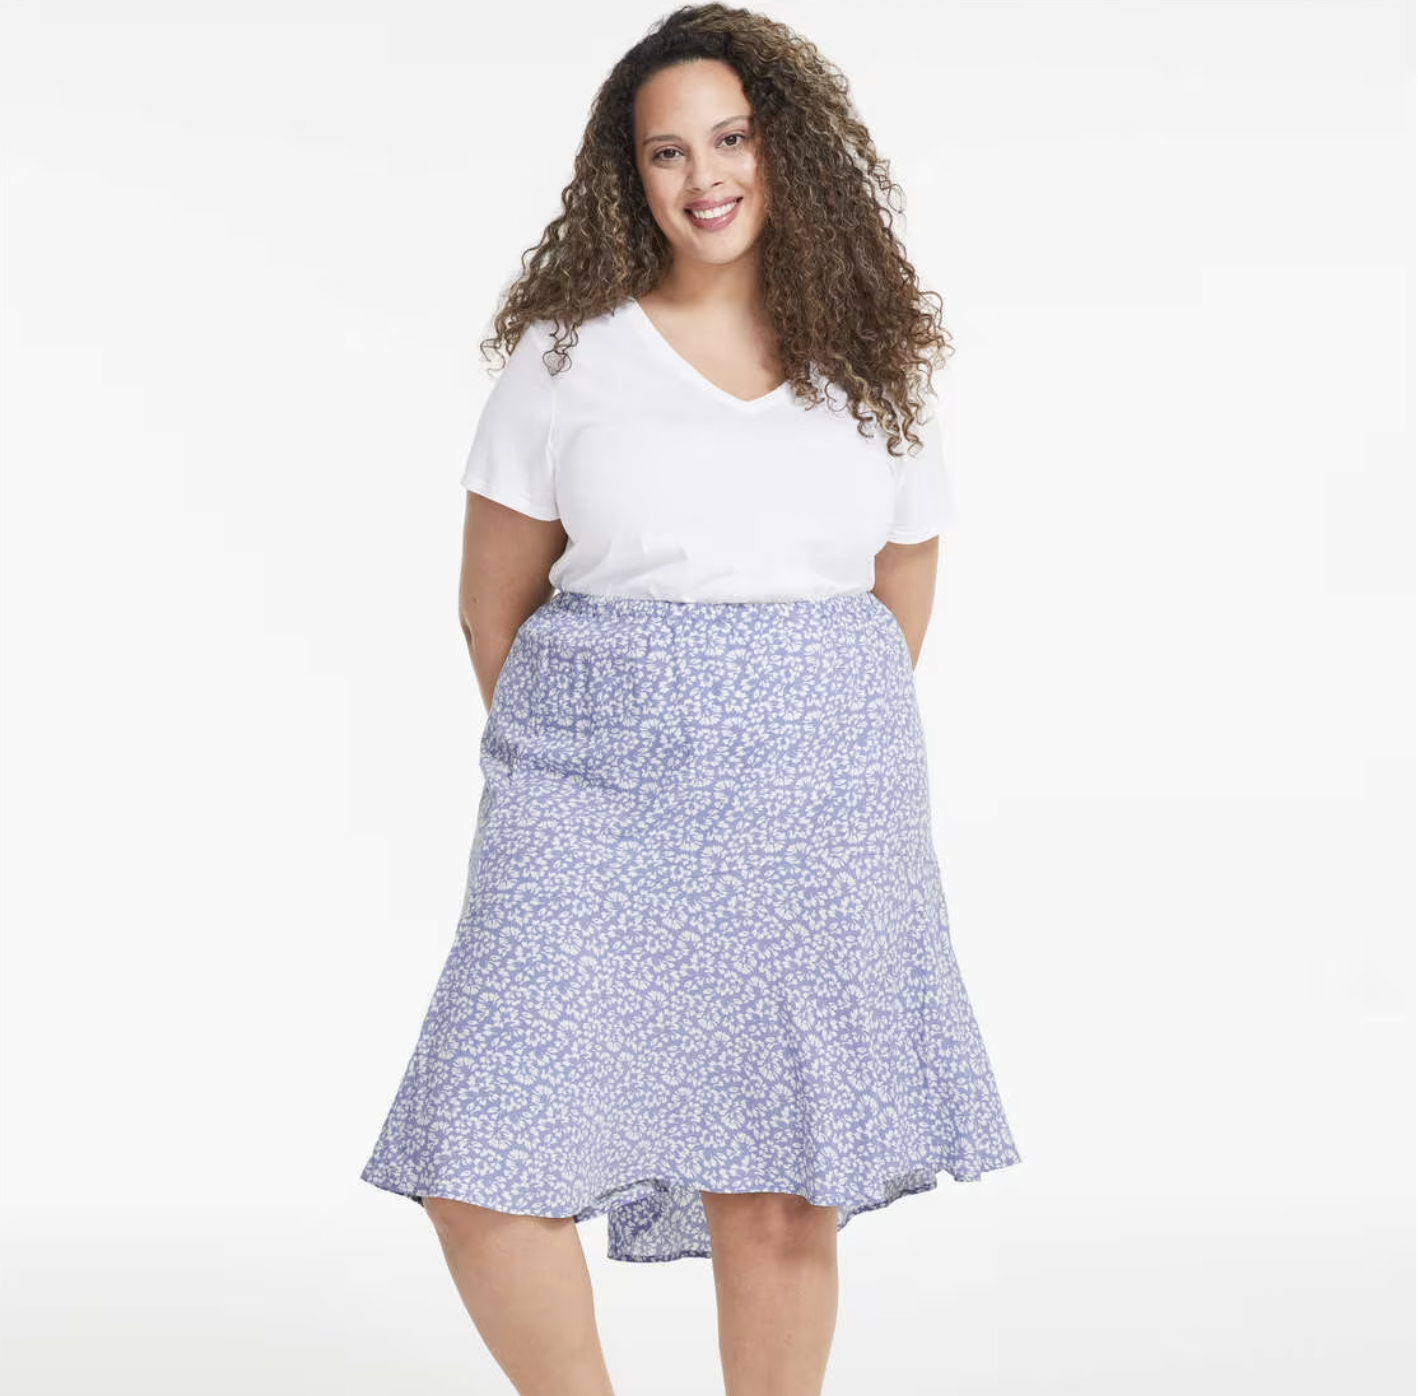 a model wearing the skirt with a plain shirt in front of a plain background